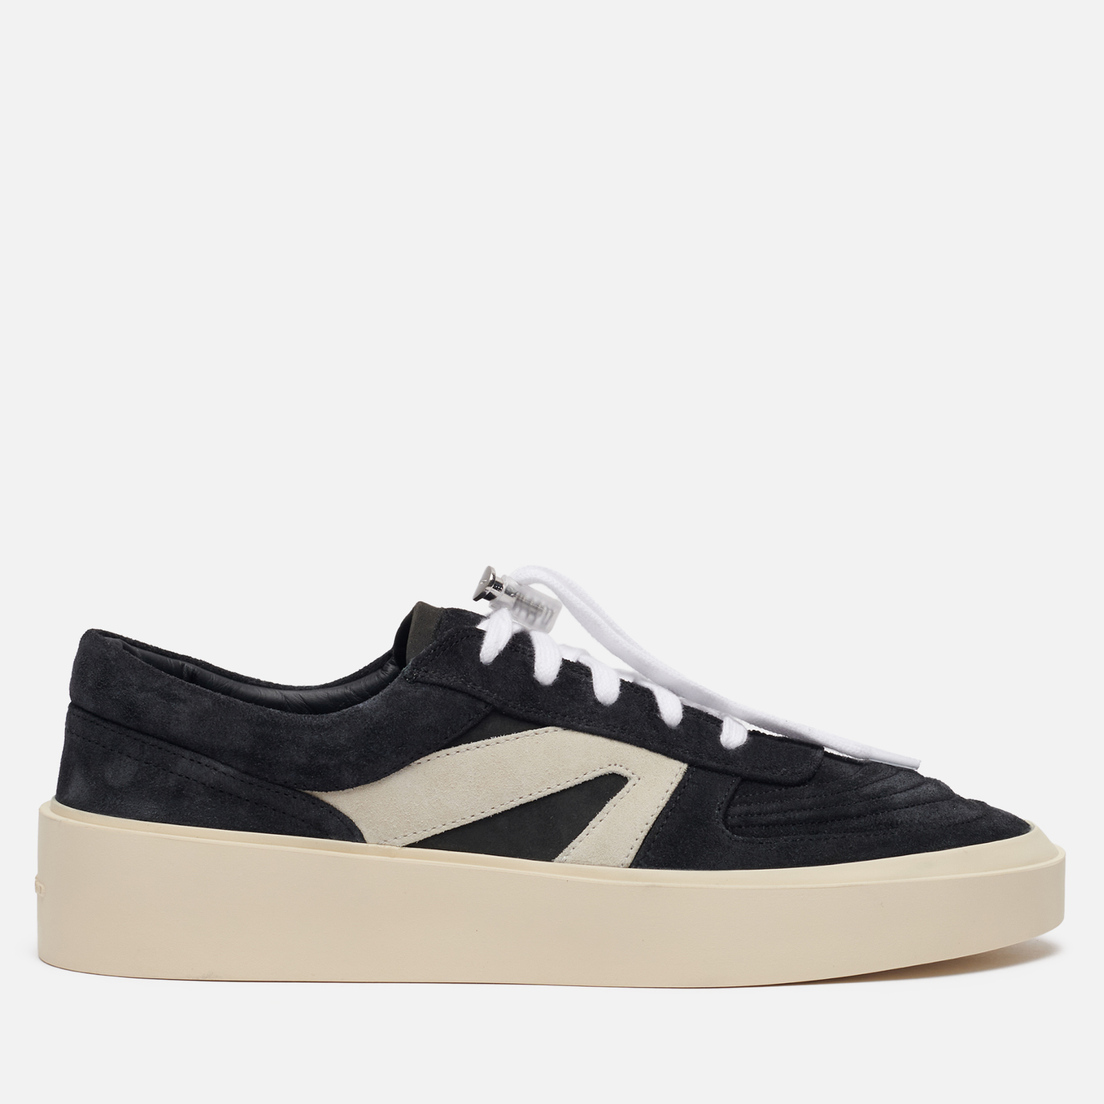 Fear of God Мужские кроссовки Skate Low Suede/Leather